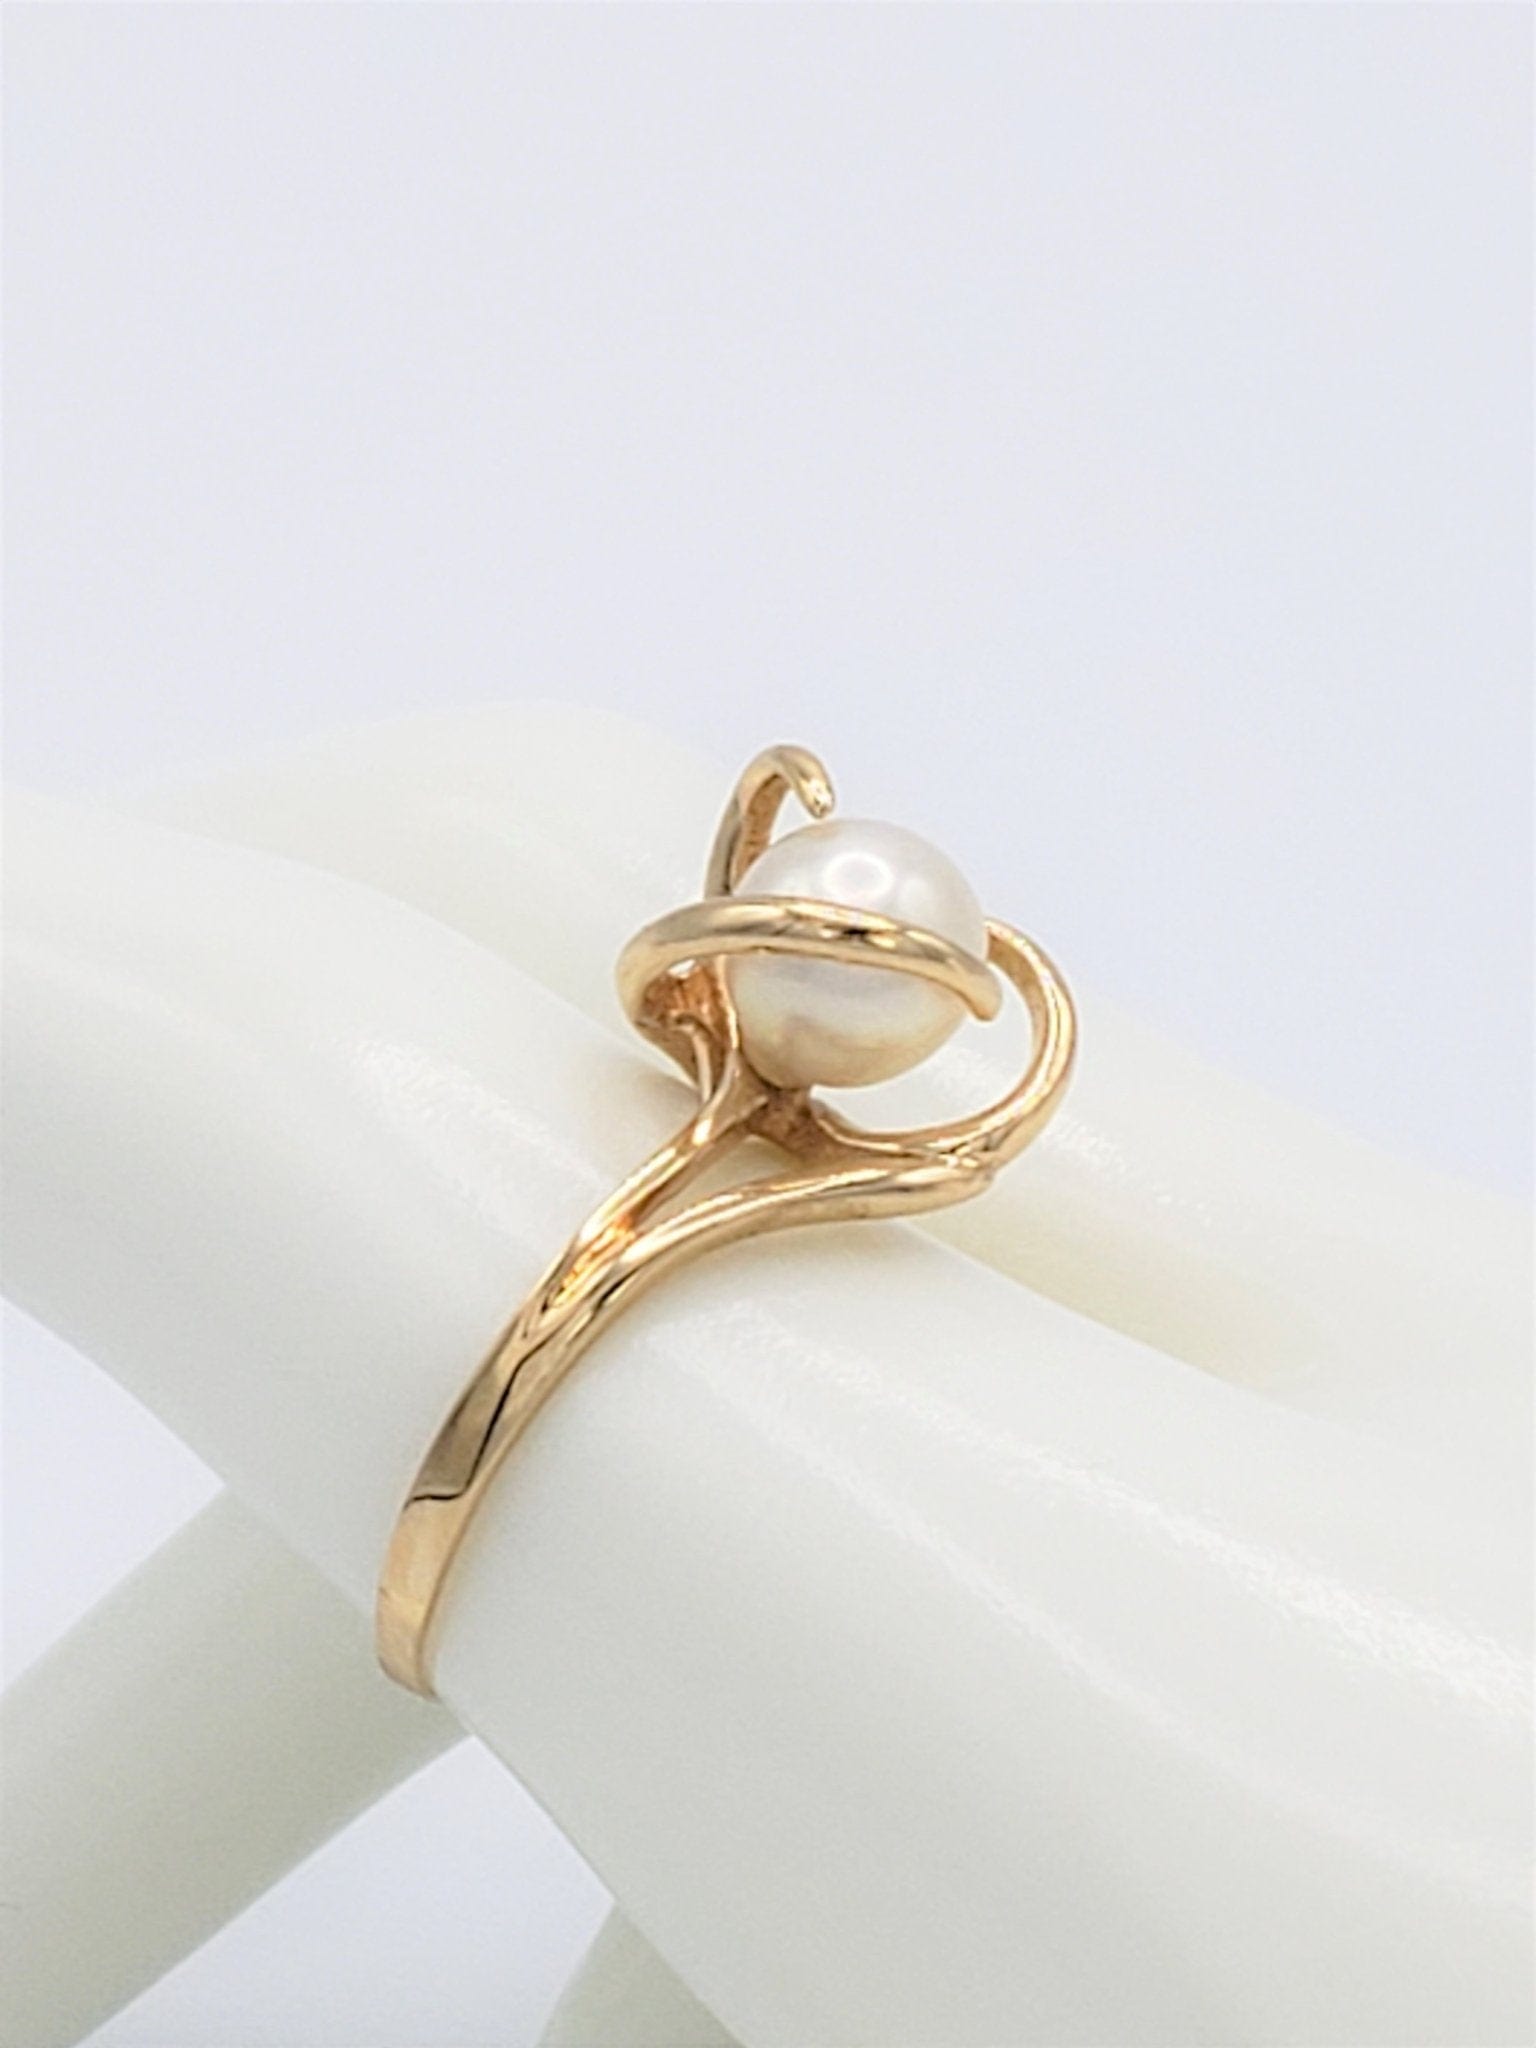 TMCMH Jewelry Vintage 14k Yellow Gold & Pearl Abstract Modernist Statement Cocktail Ring